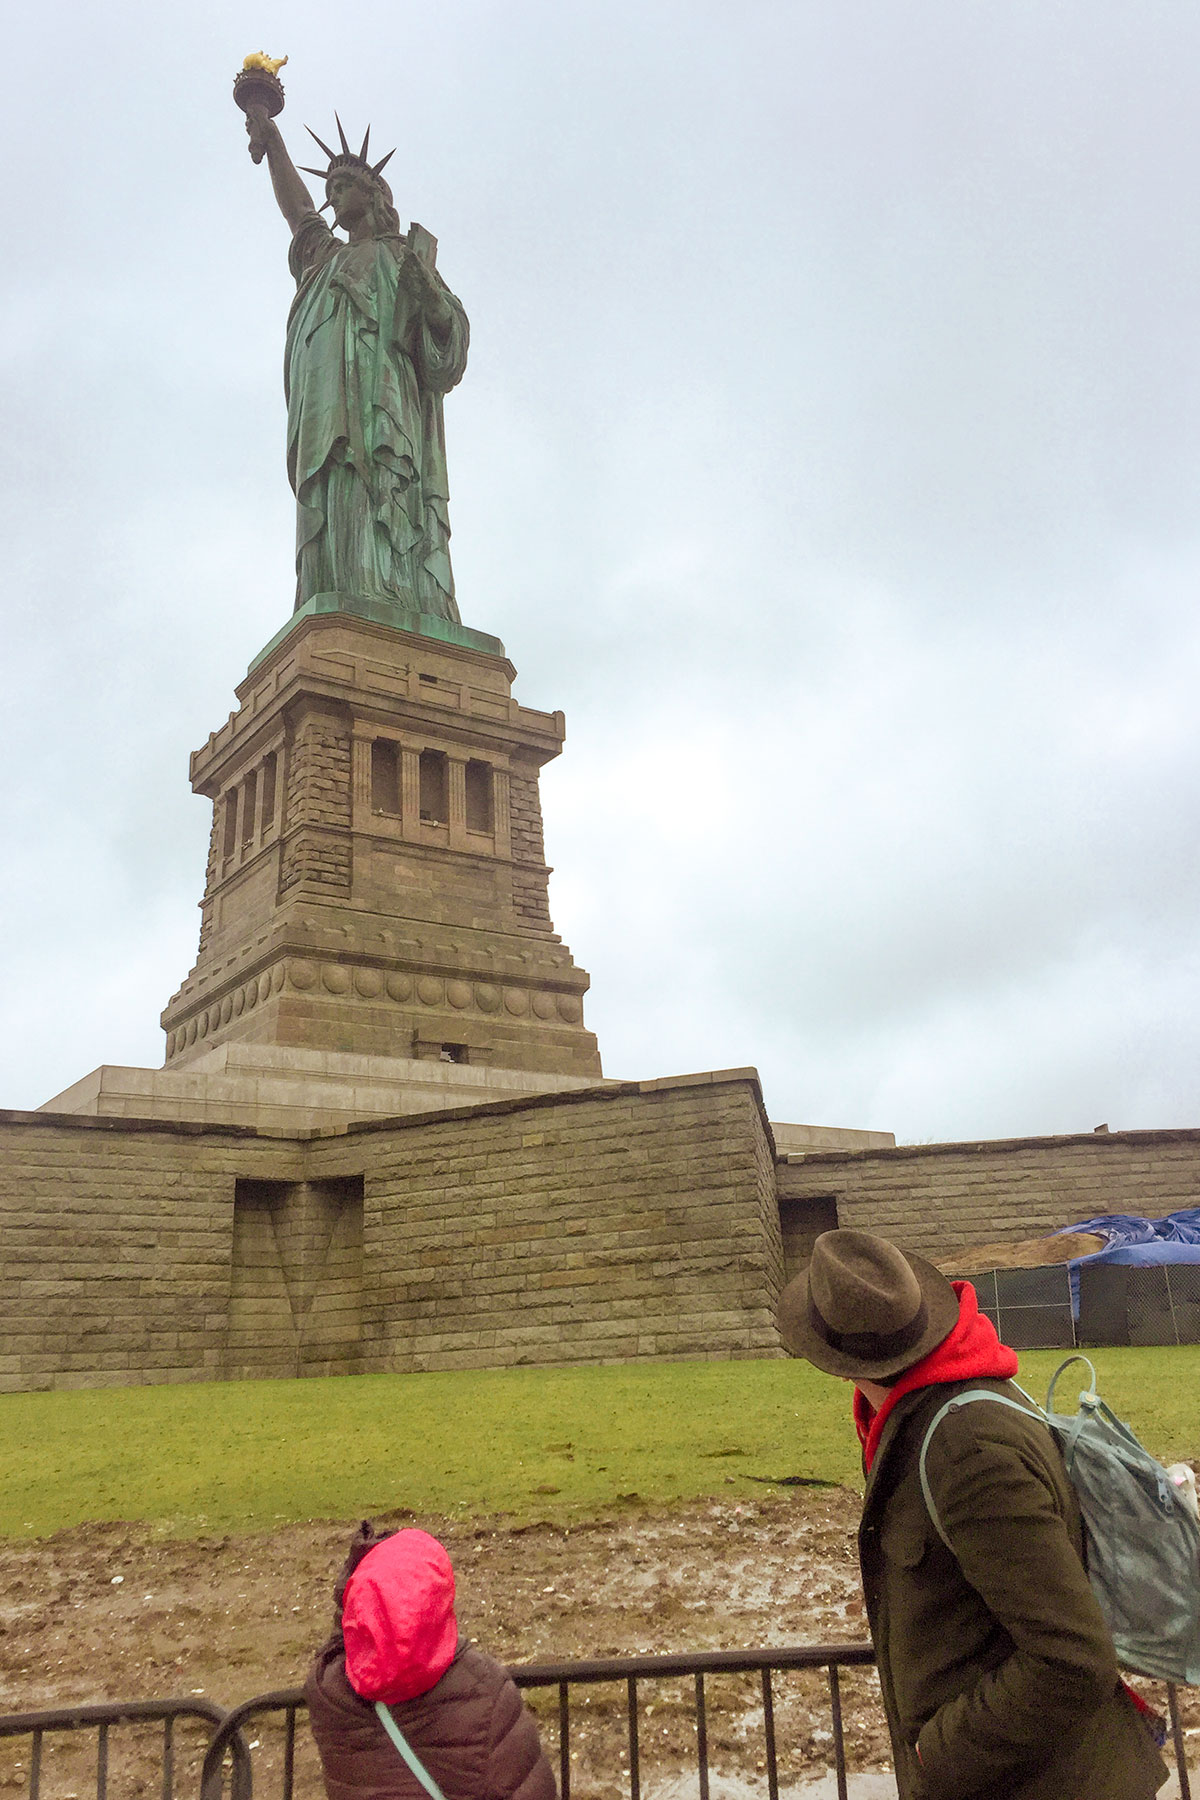 Connor Gaudet, Associate Curator & Collections Manager, shares his experience visiting the Tribute Museum and Statue Of Liberty with his 10-year-old niece